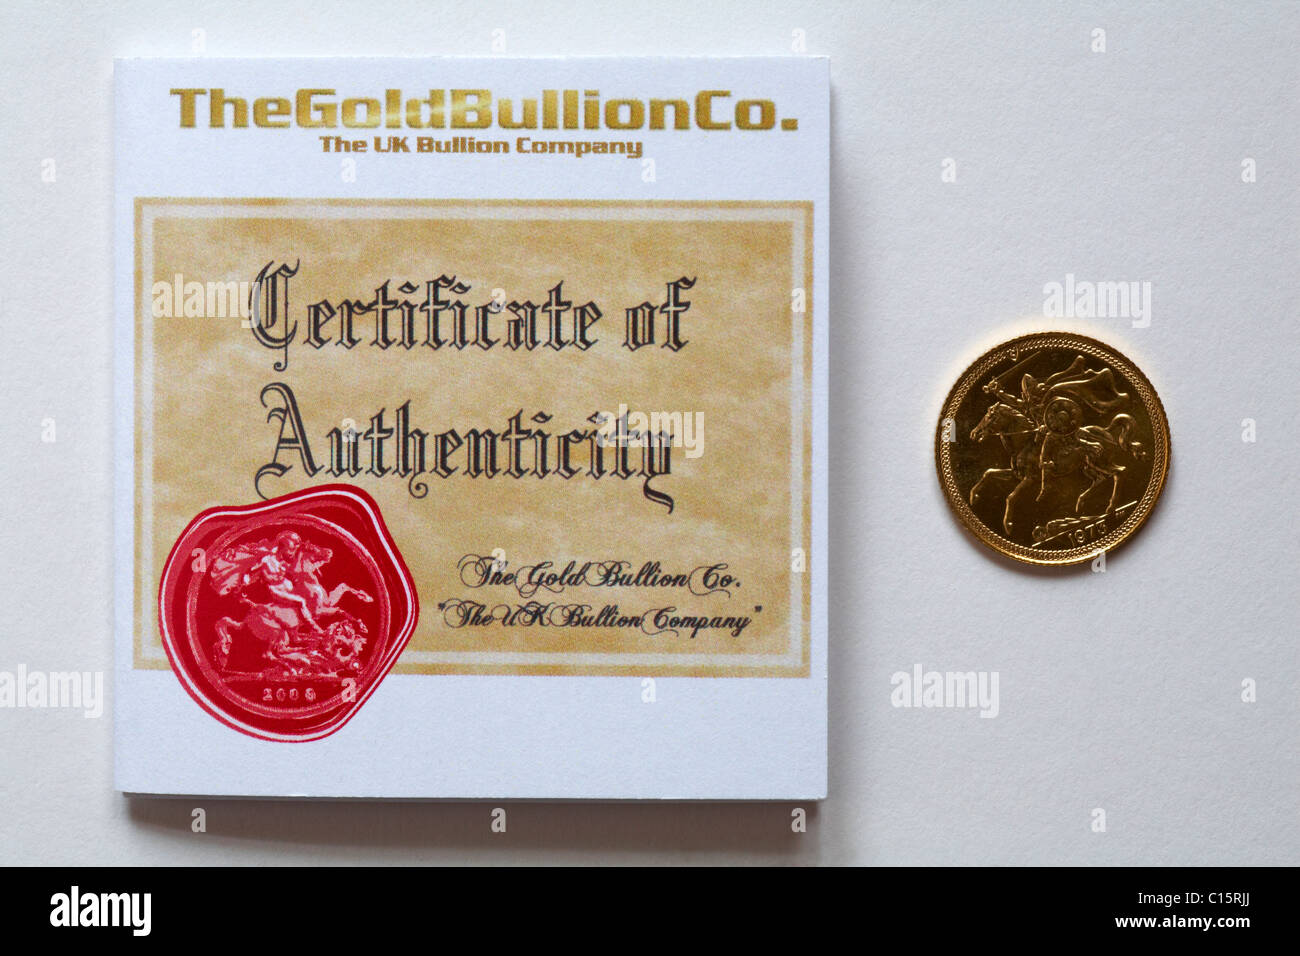 Gold half sovereign with certificate of authenticity issued by The Gold Bullion Co, the UK Bullion Company, on white background Stock Photo